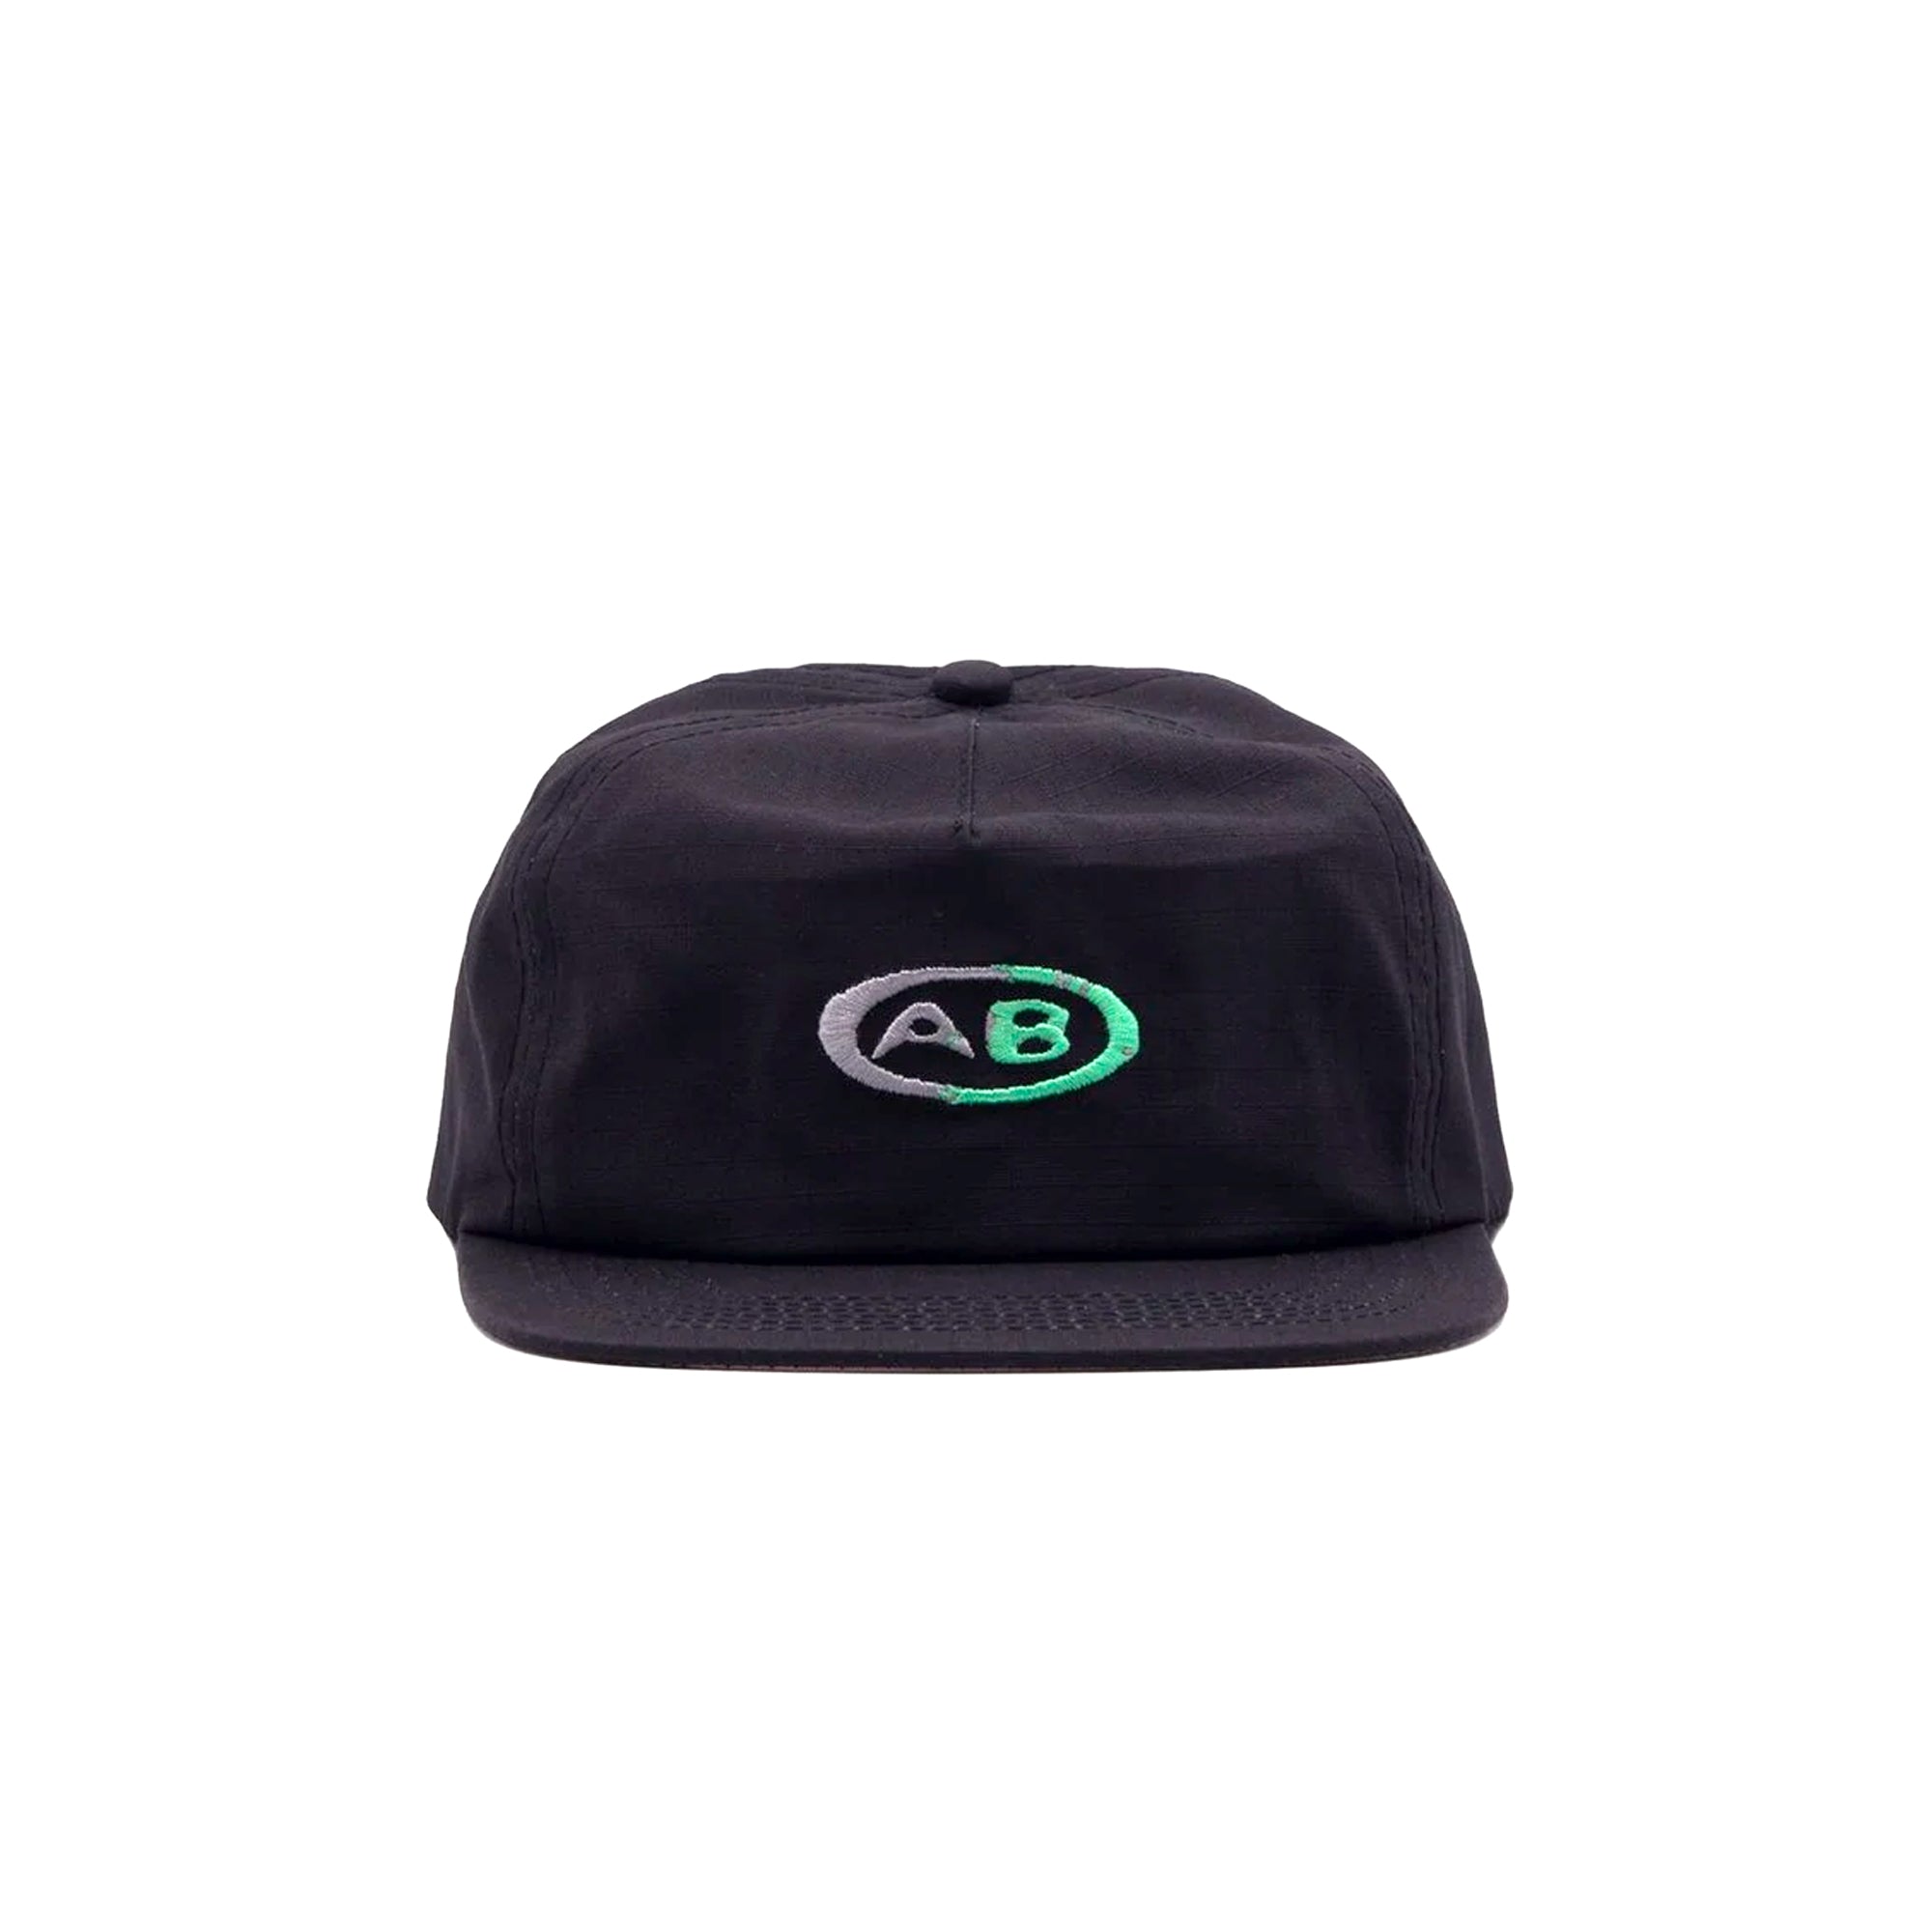 AB-90 Unstructured Hat